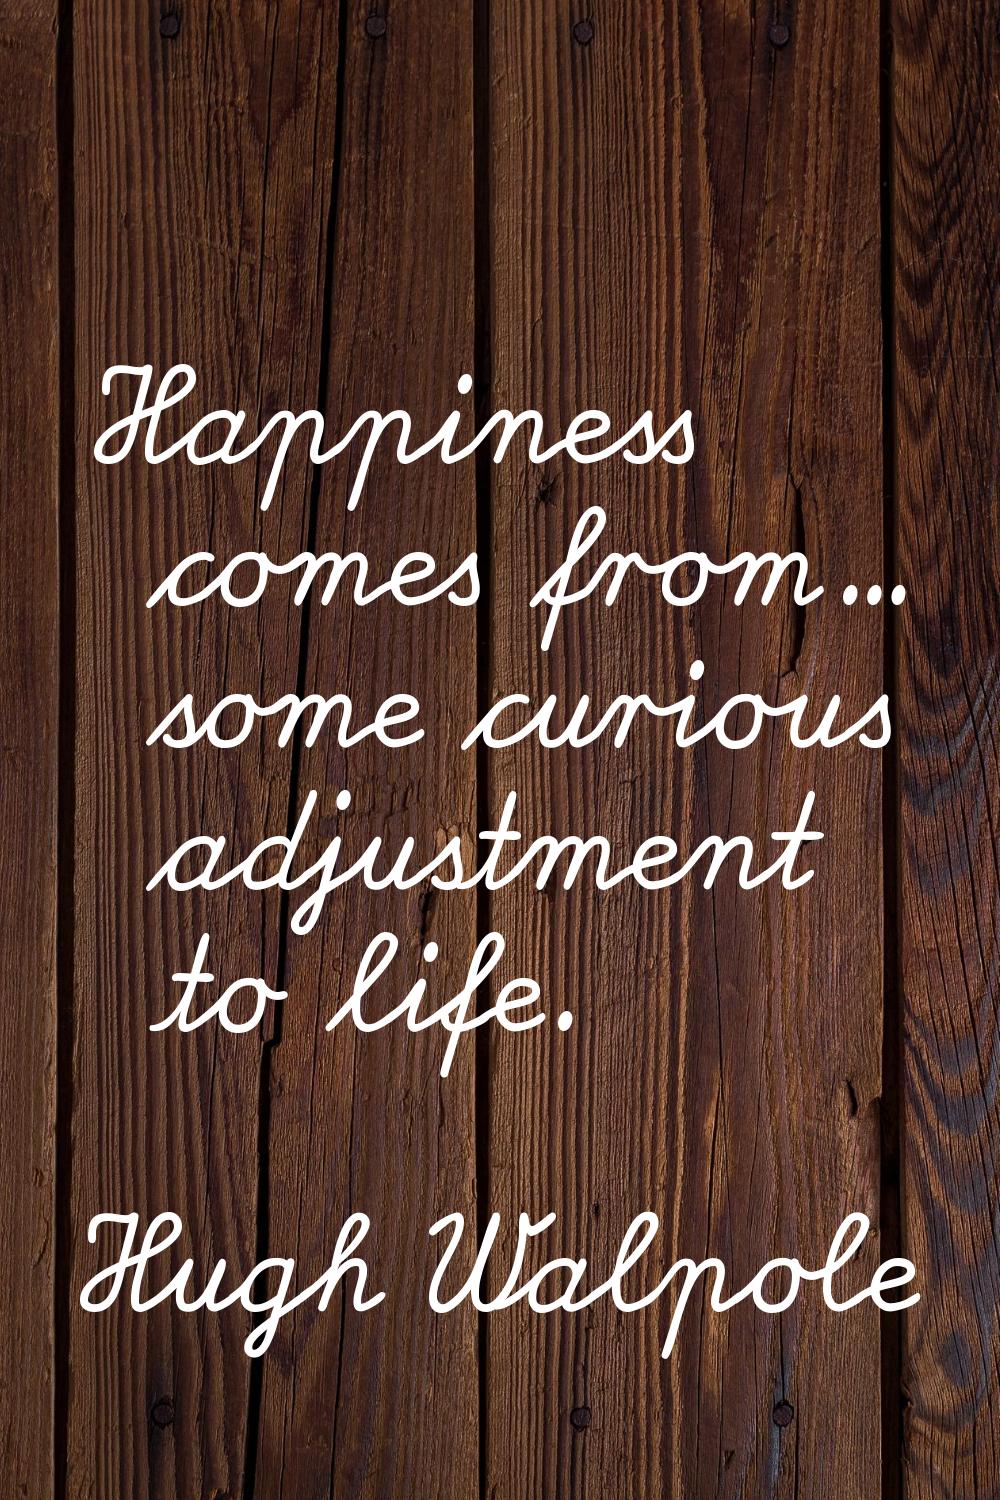 Happiness comes from... some curious adjustment to life.